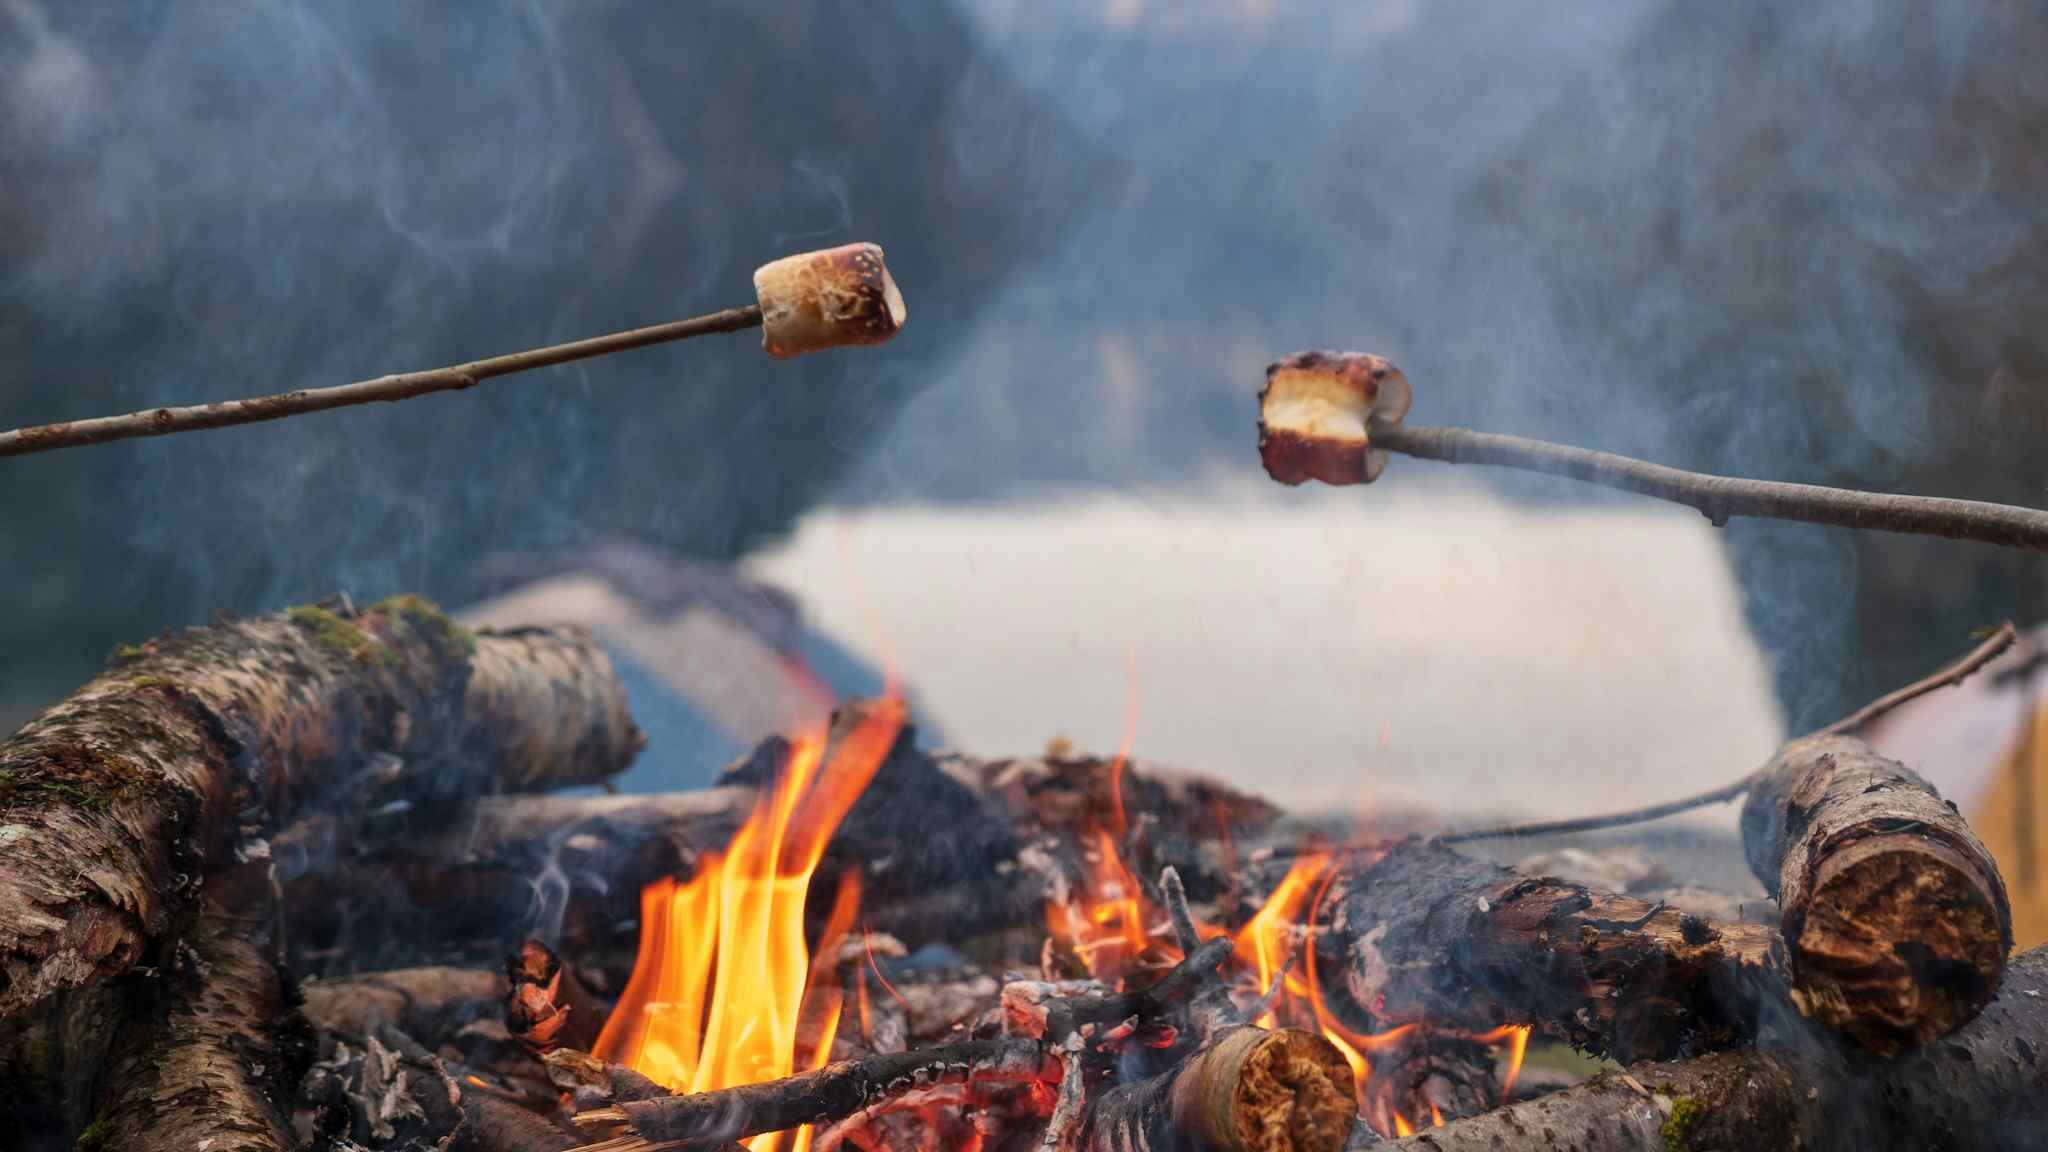 Toasting marshmallows over the campfire in the Norwegian Fjords. 